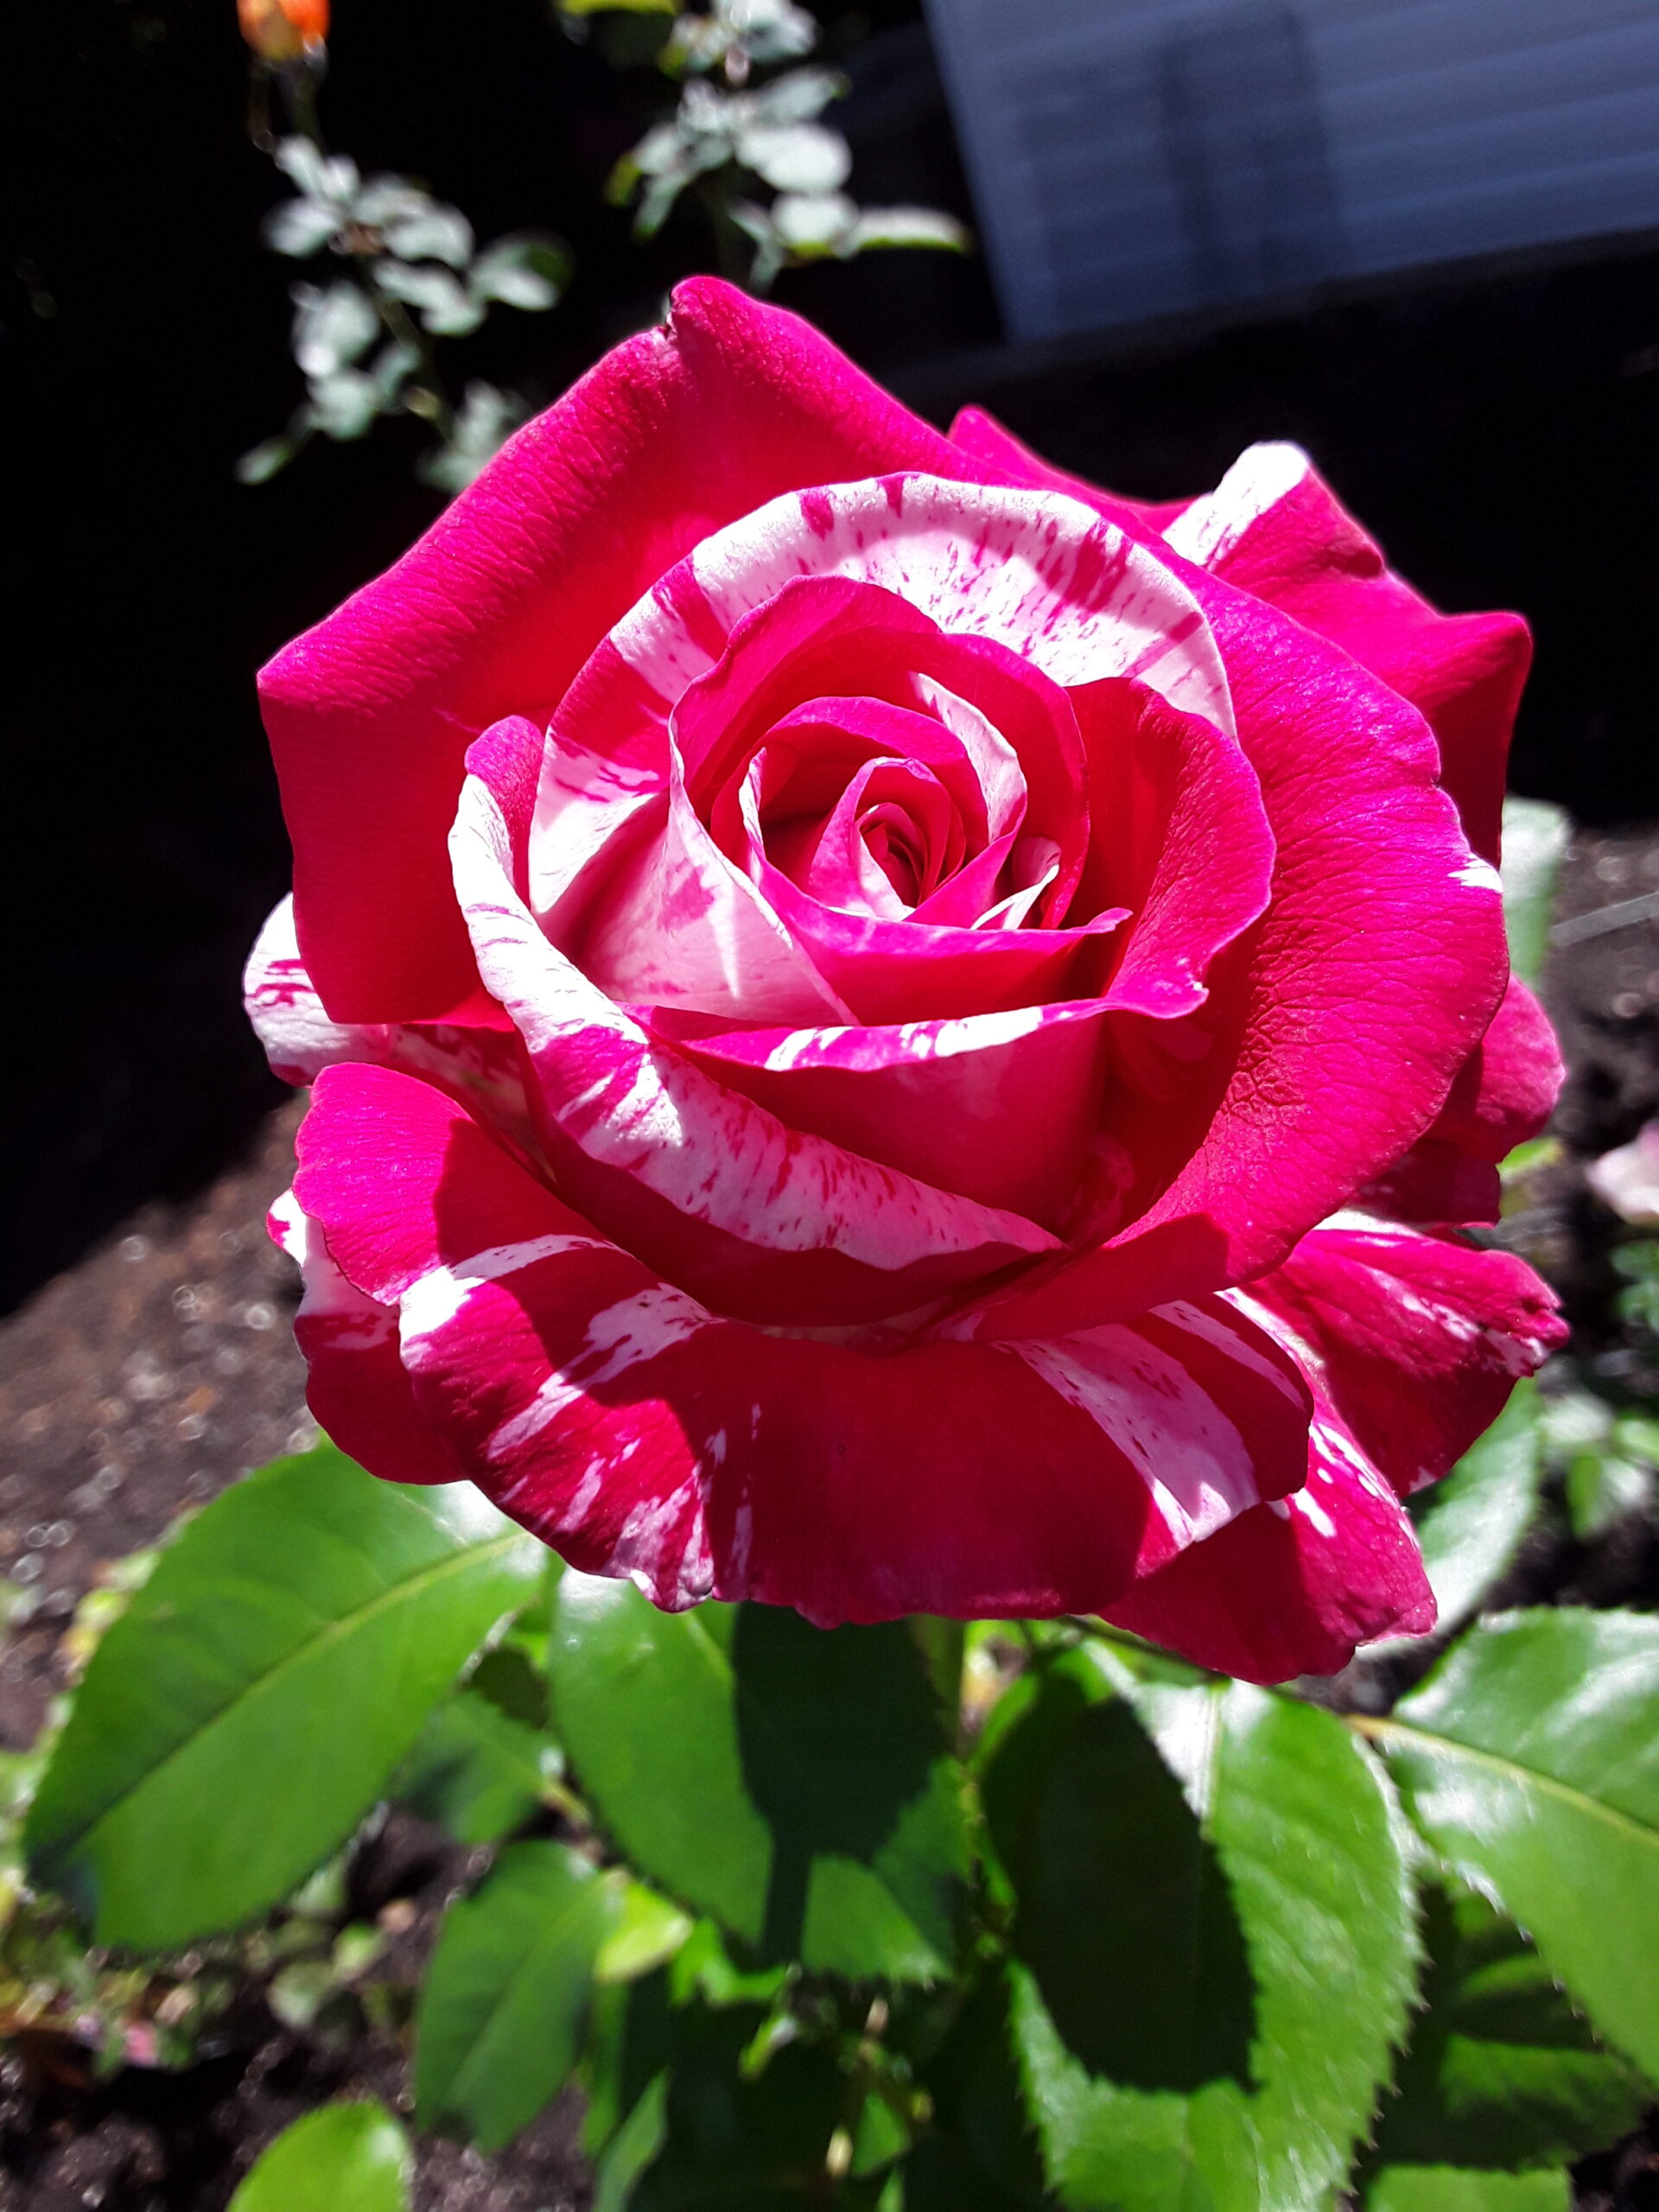 photo of a pink rose flower